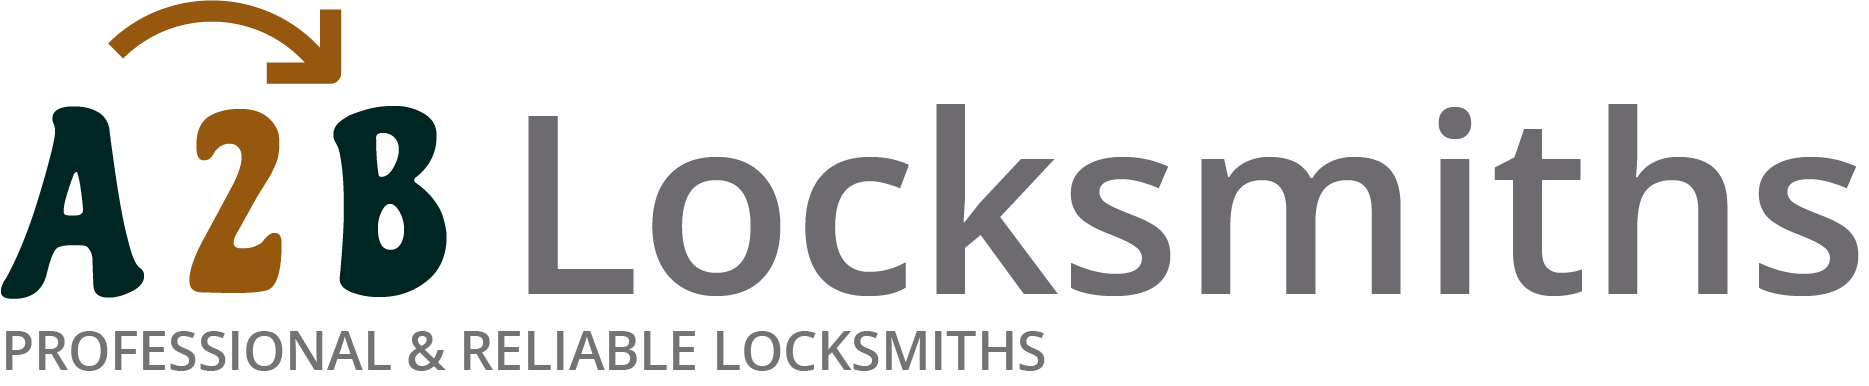 If you are locked out of house in Clevedon, our 24/7 local emergency locksmith services can help you.